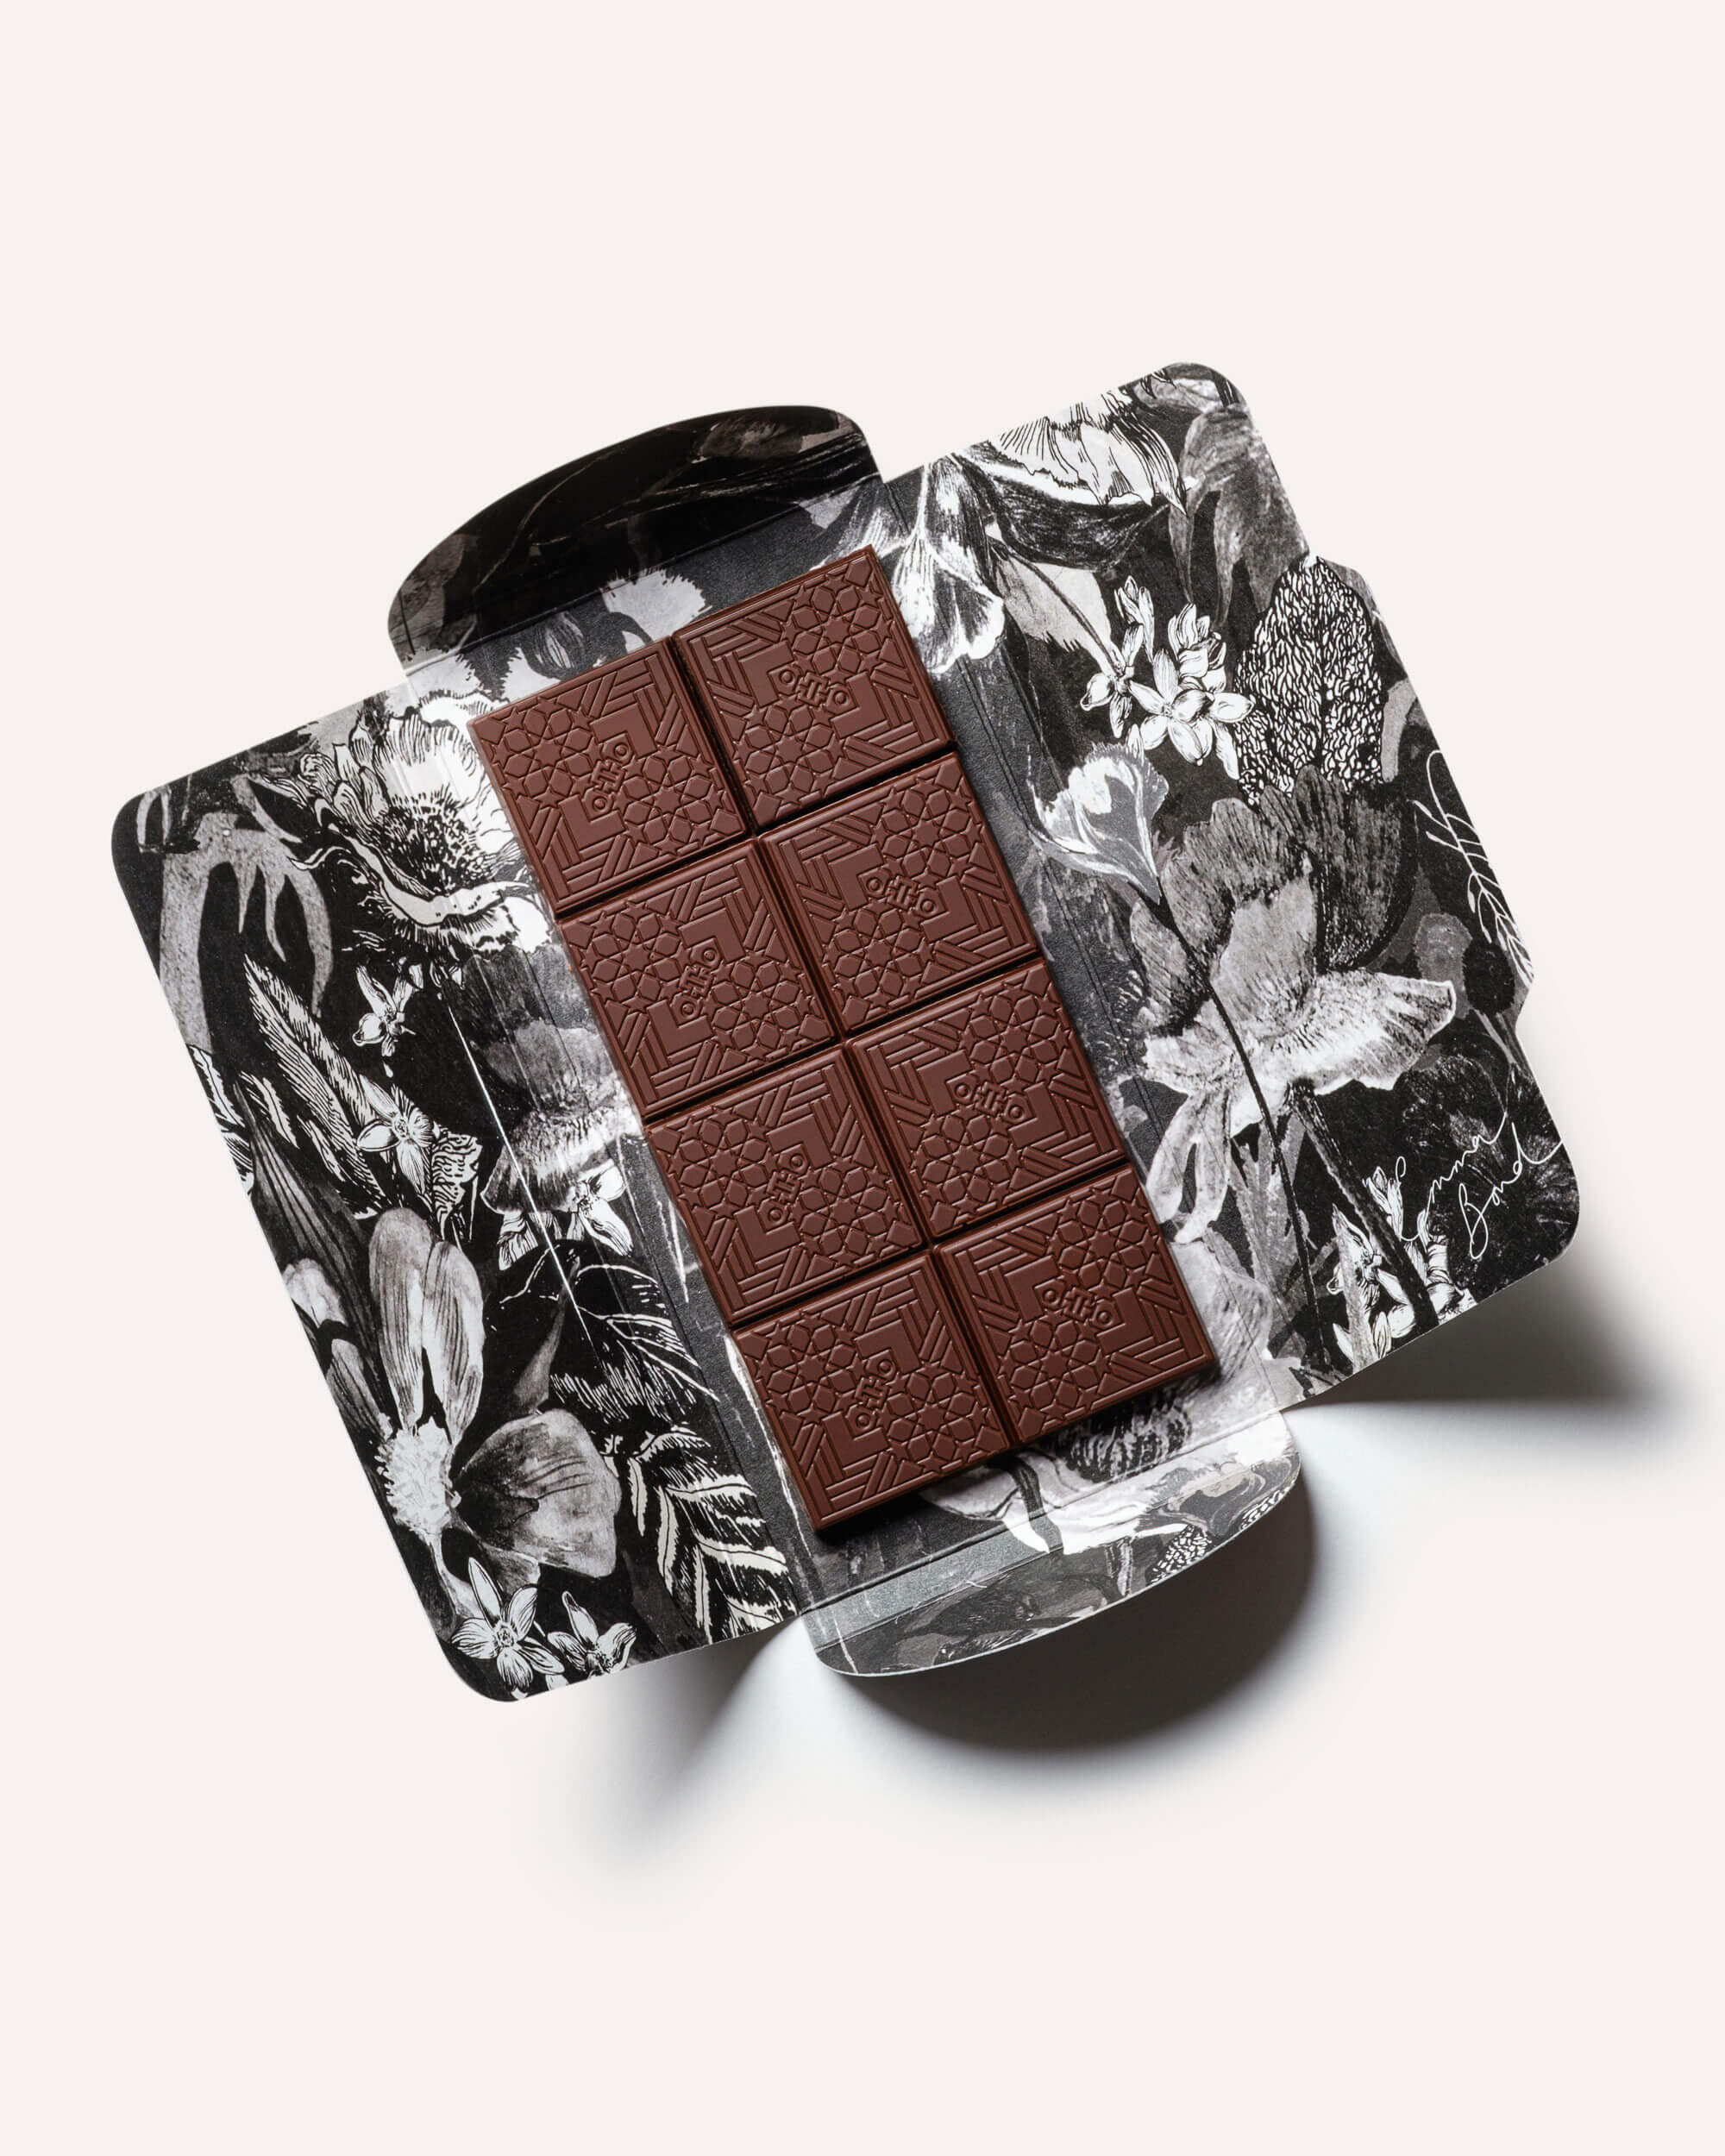 CBDay Dark Chocolate floral packaging open